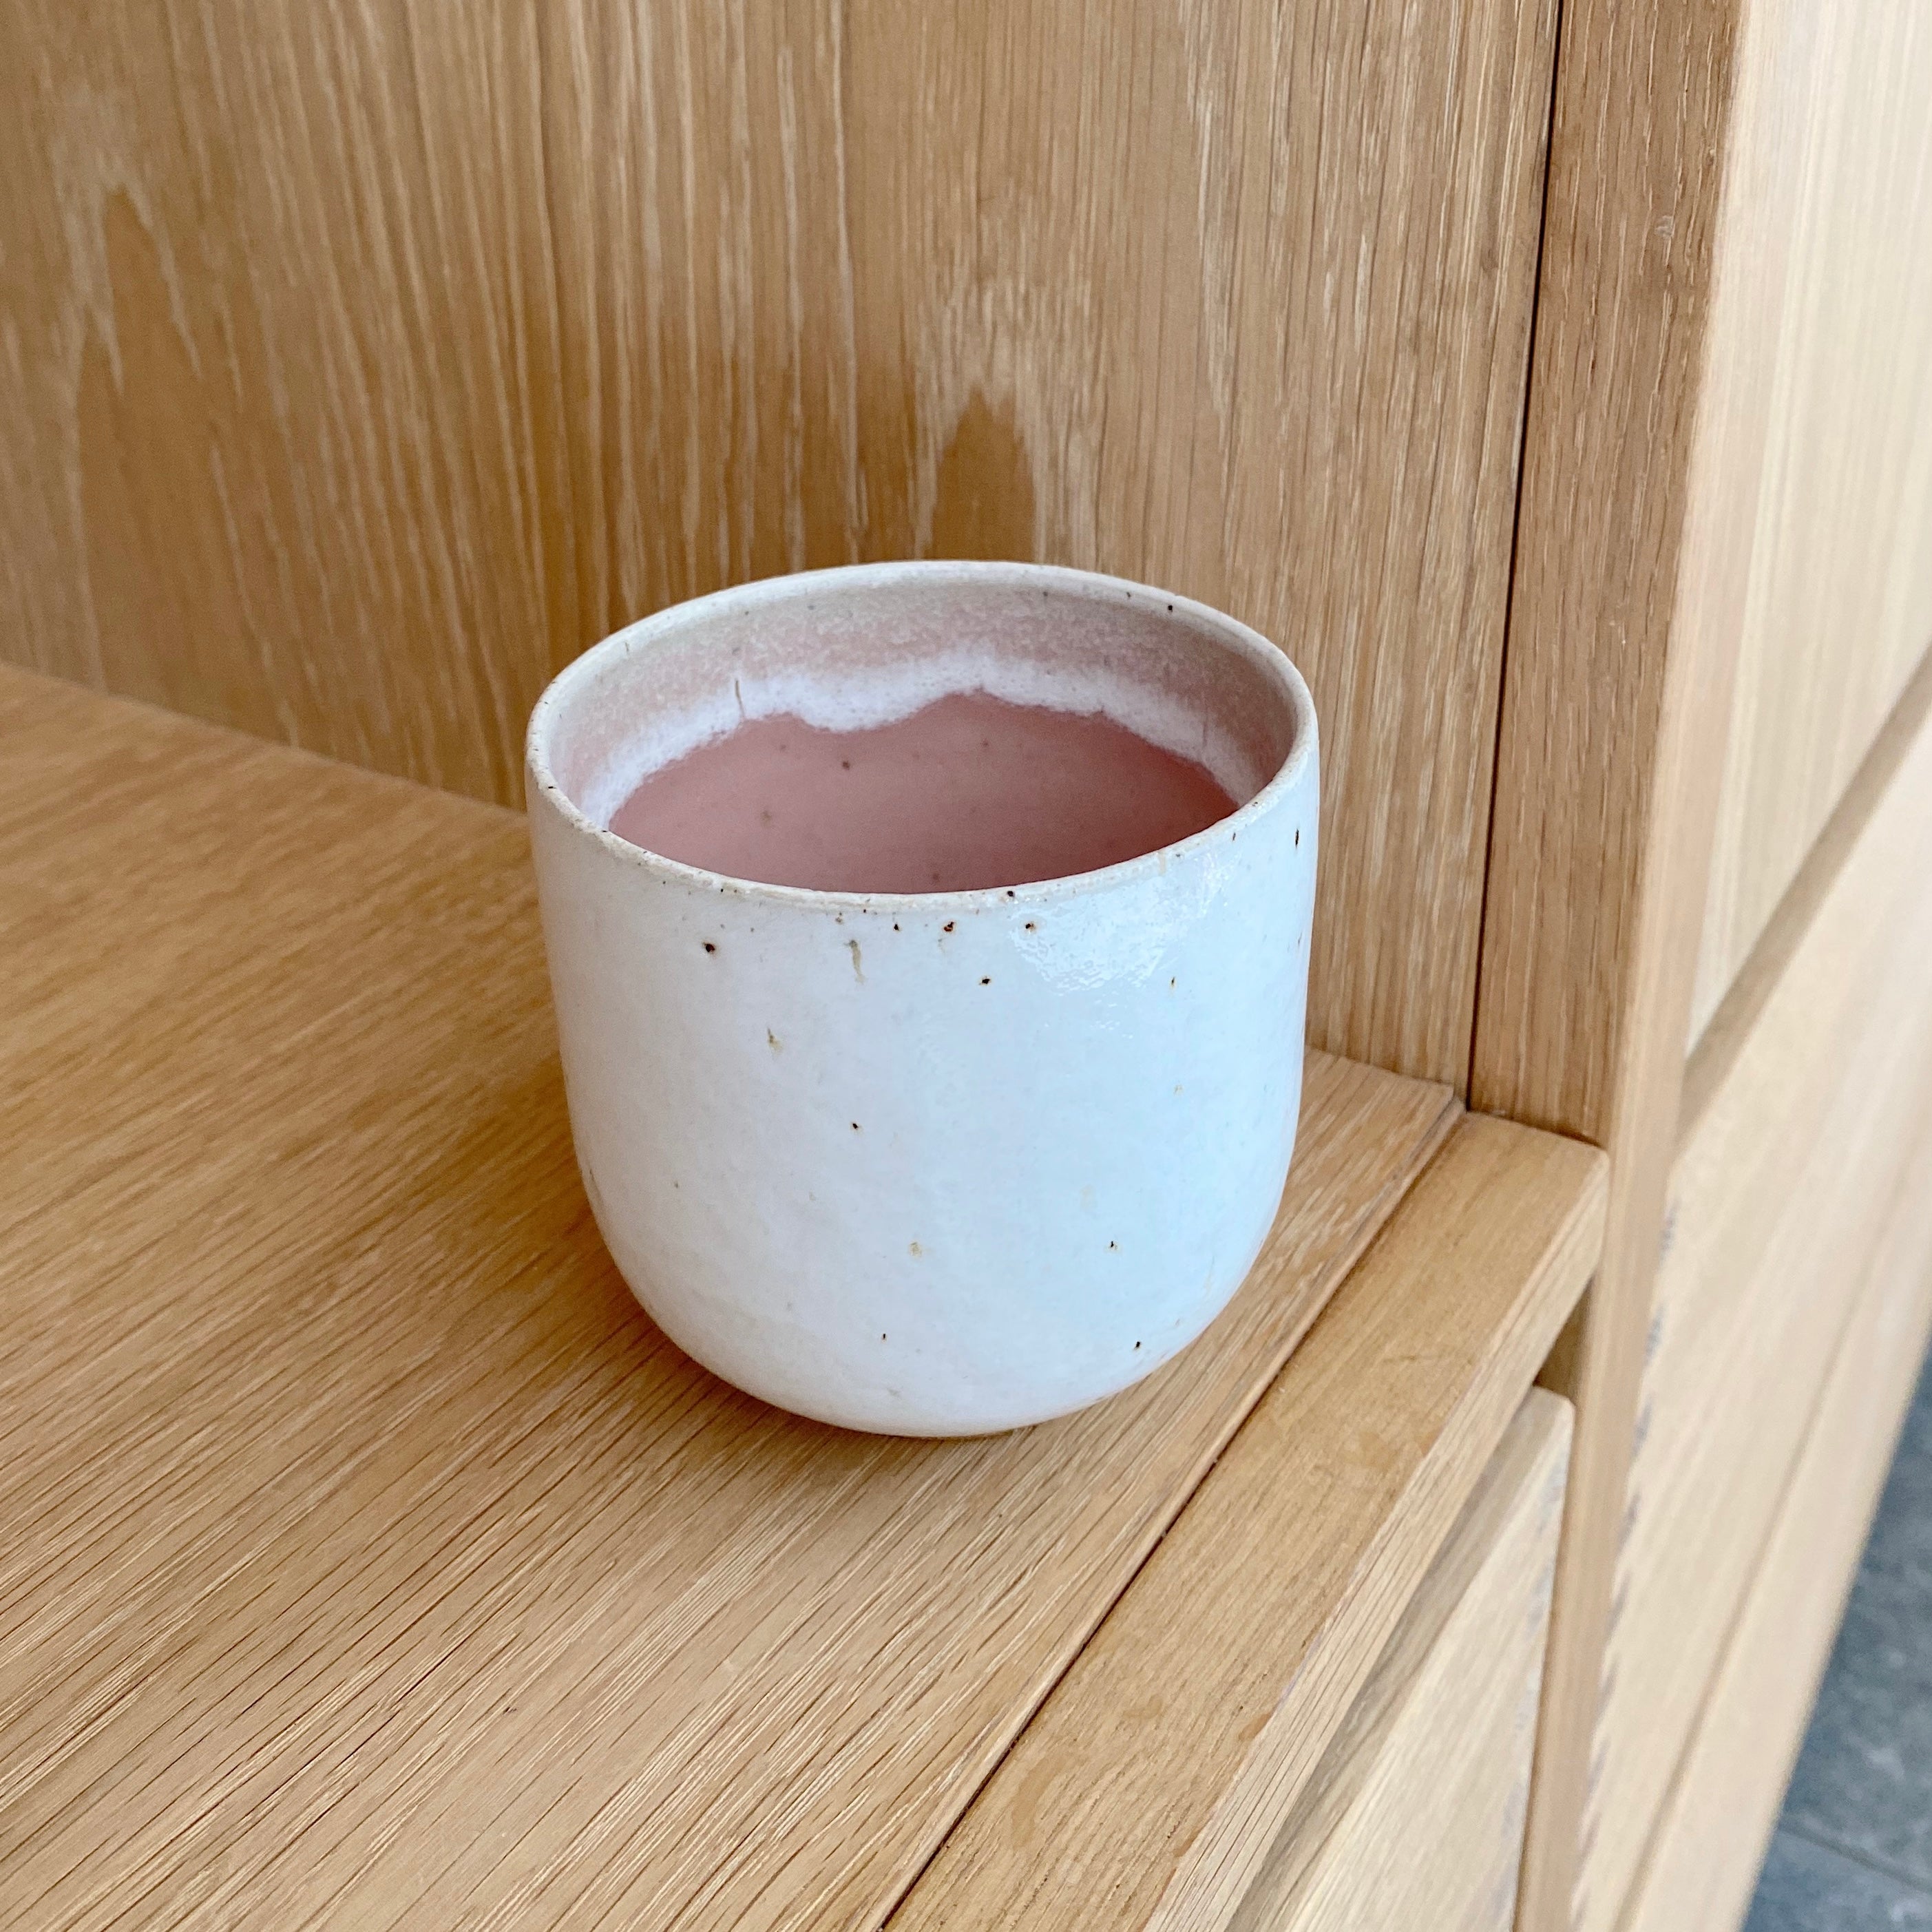 Tasja P coffee cup - off white and pink